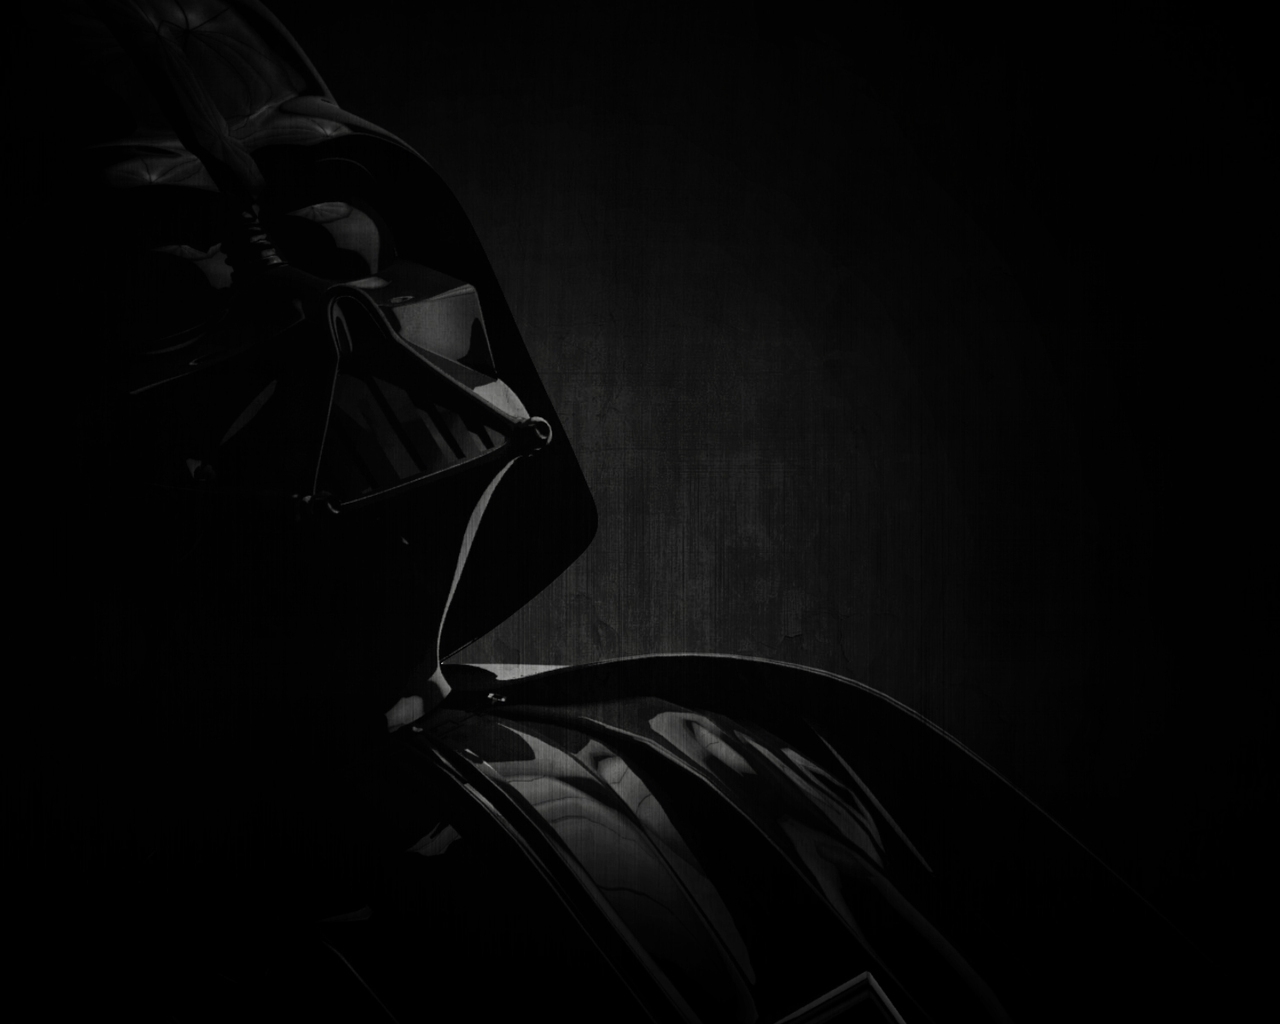 Darth Vader Character, for 1280 x 1024 resolution